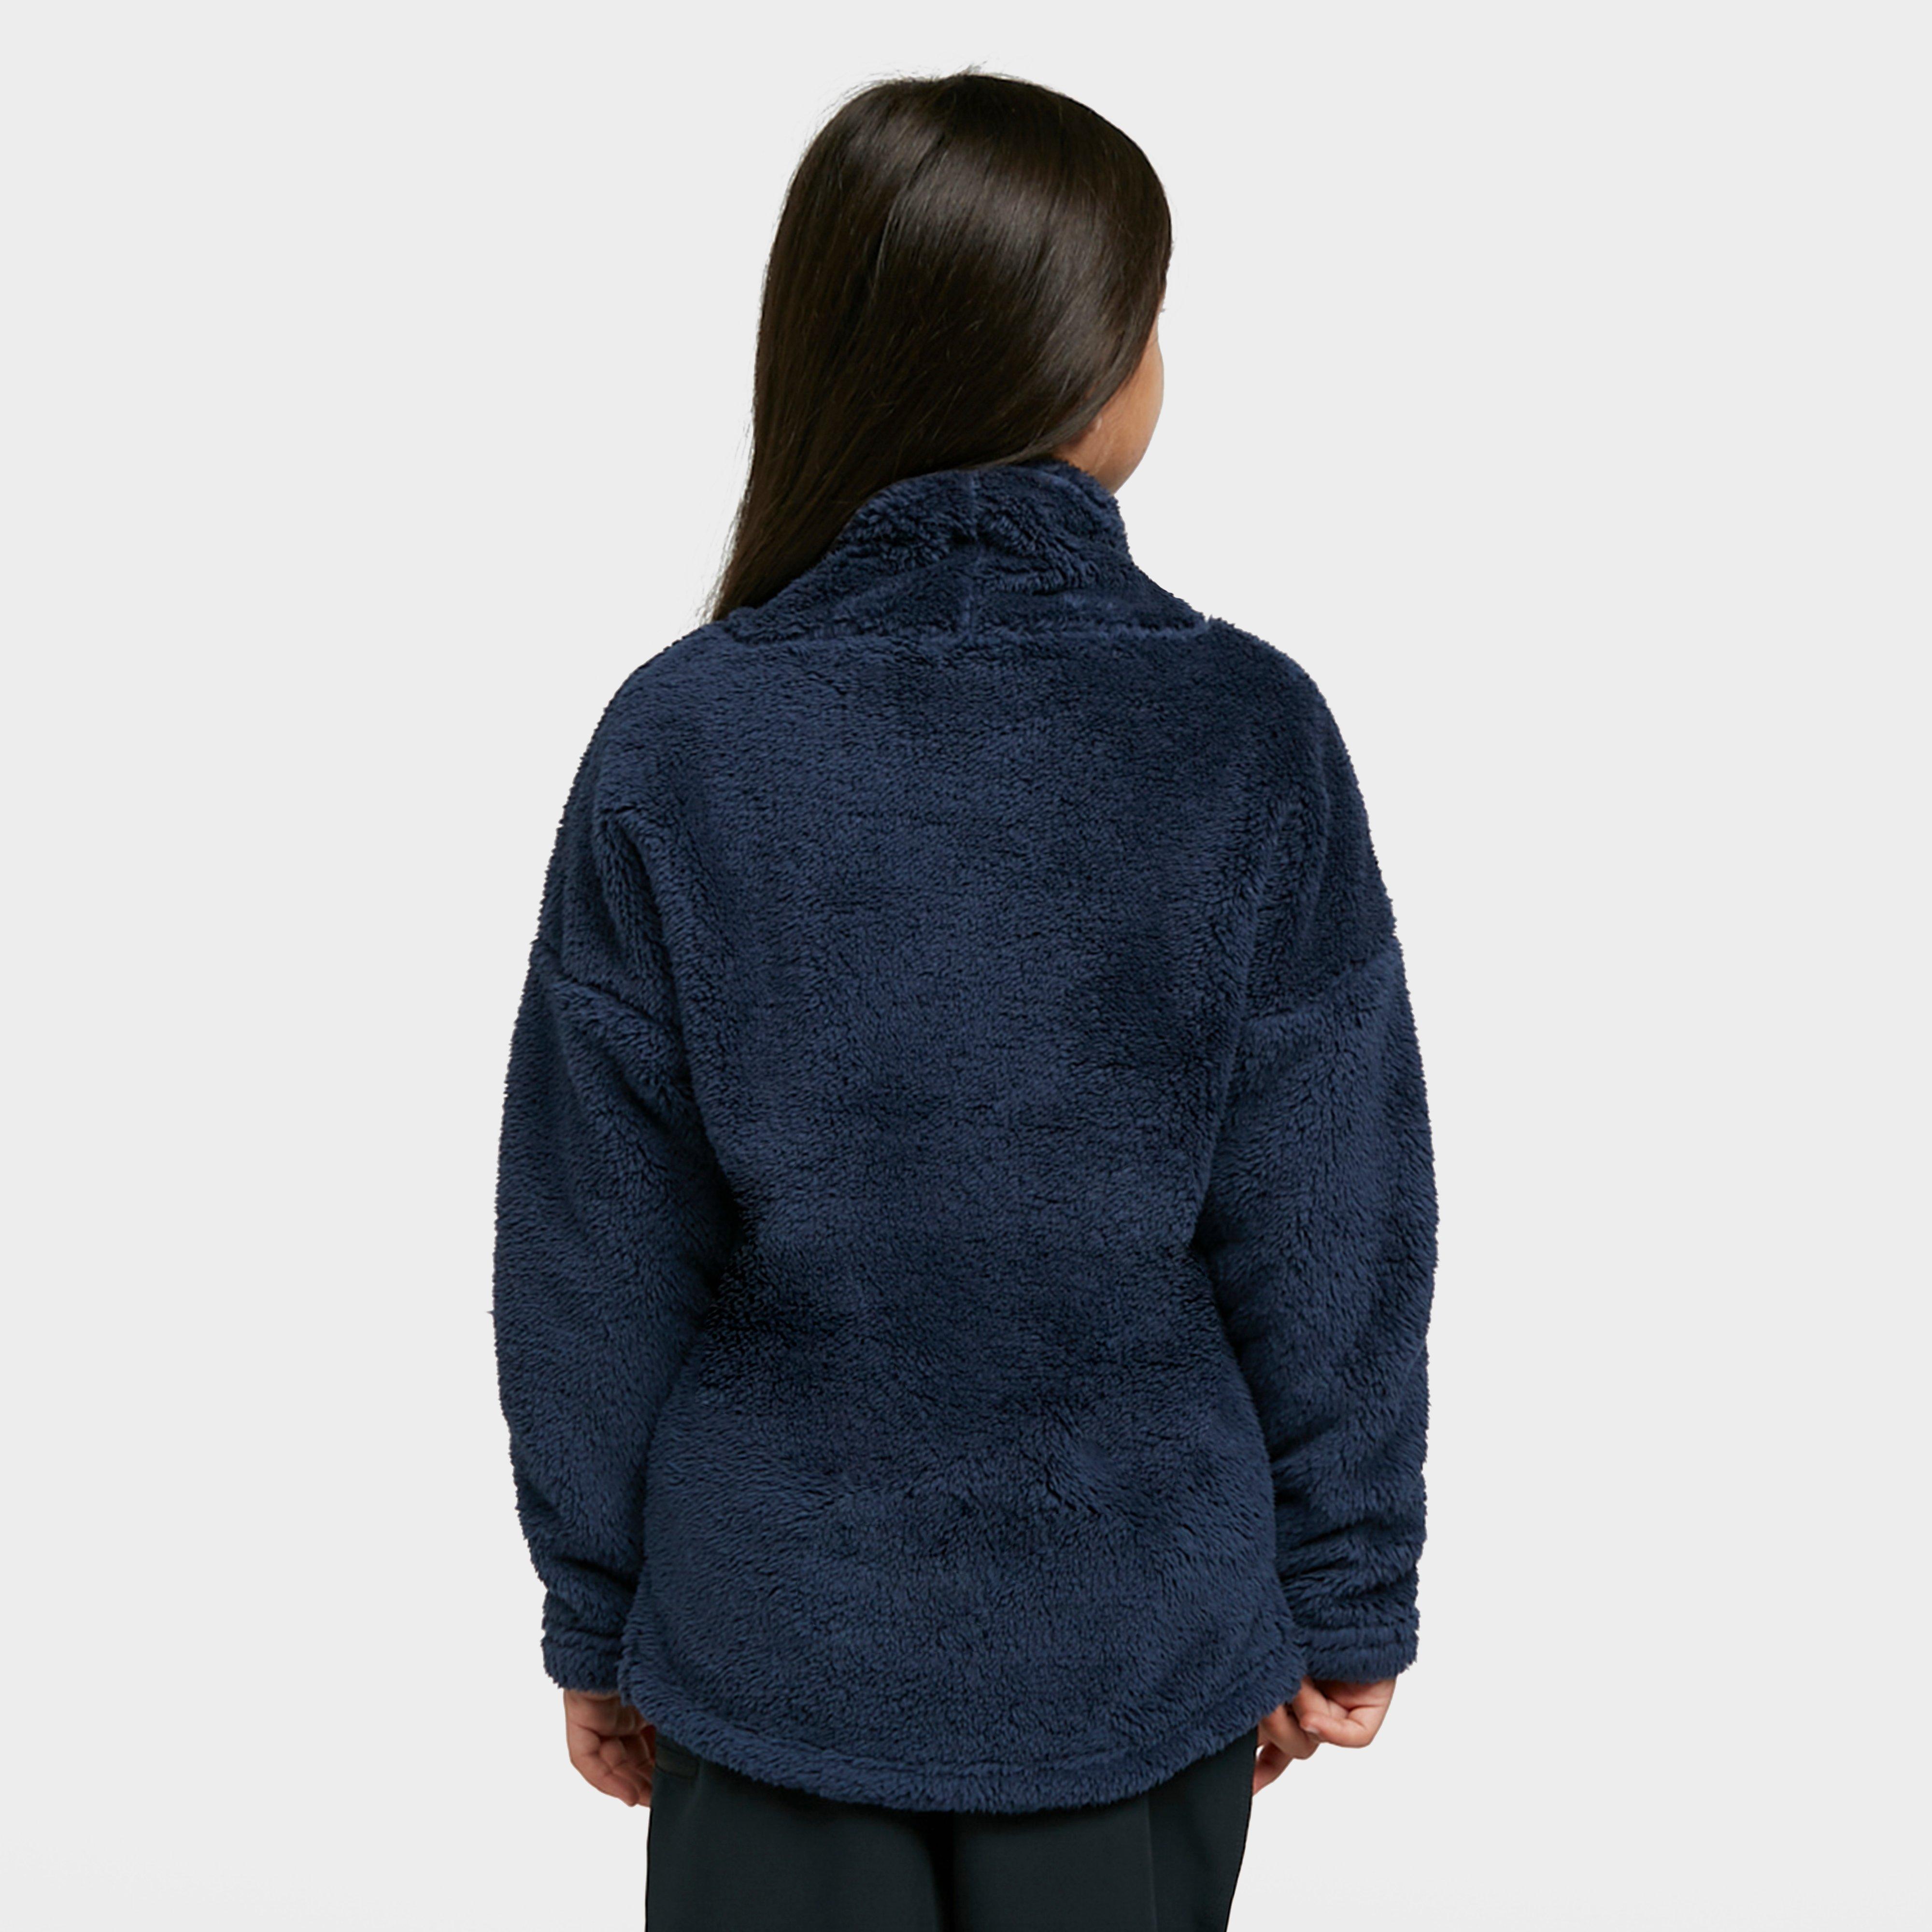 The Edge Kids' Slopestyle Cowl Fleece Top Review